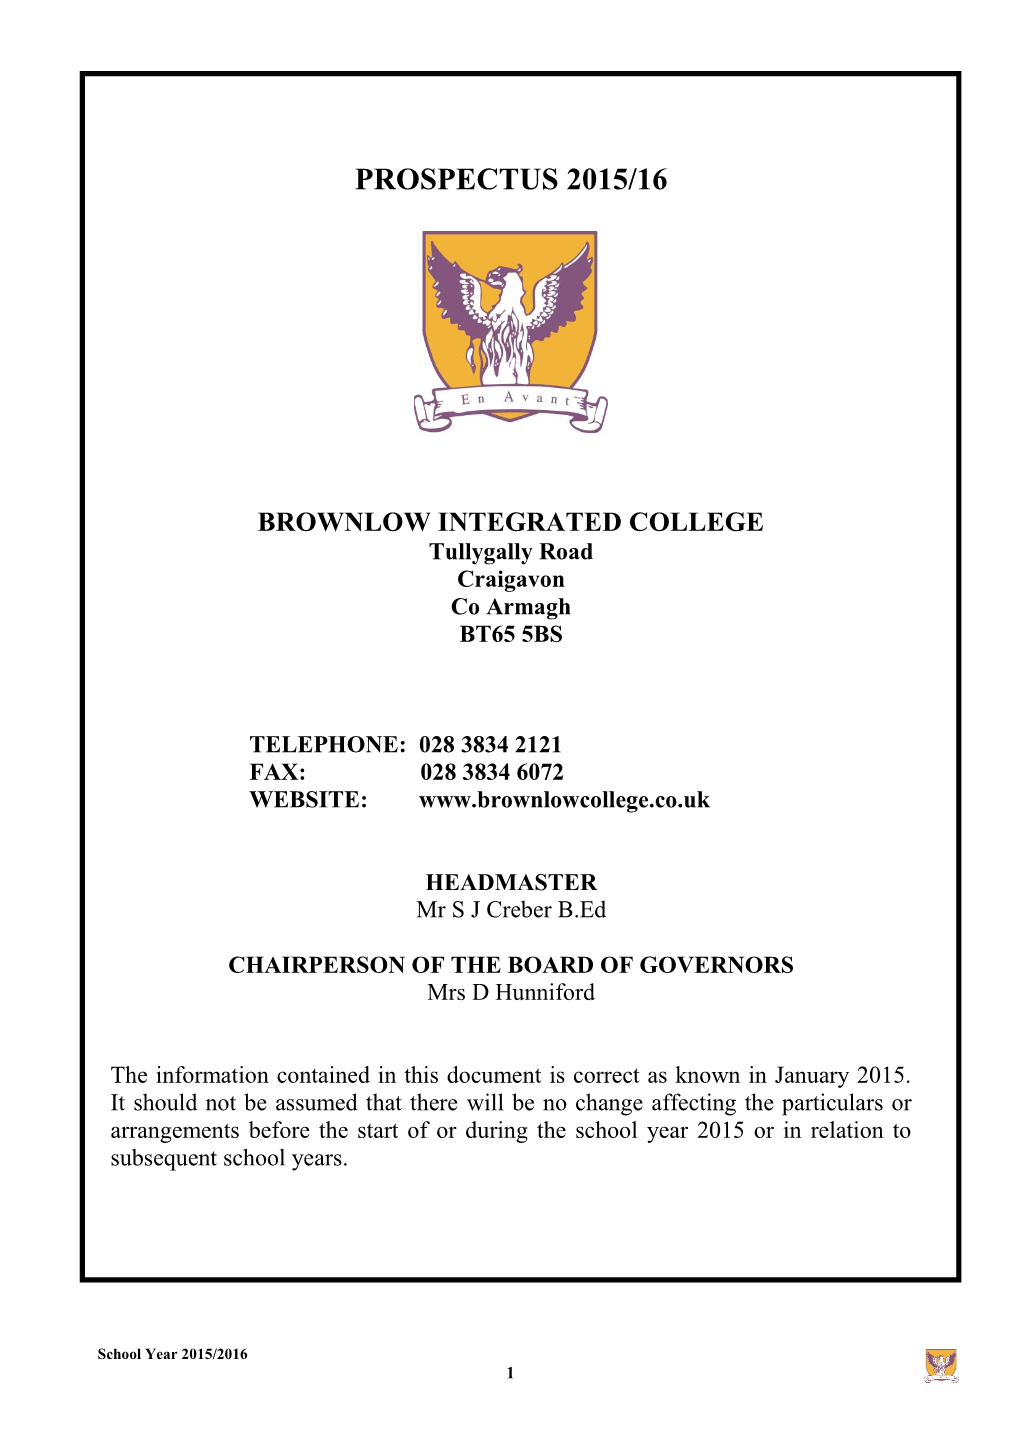 Prospectus 2015/16 Brownlow Integrated College